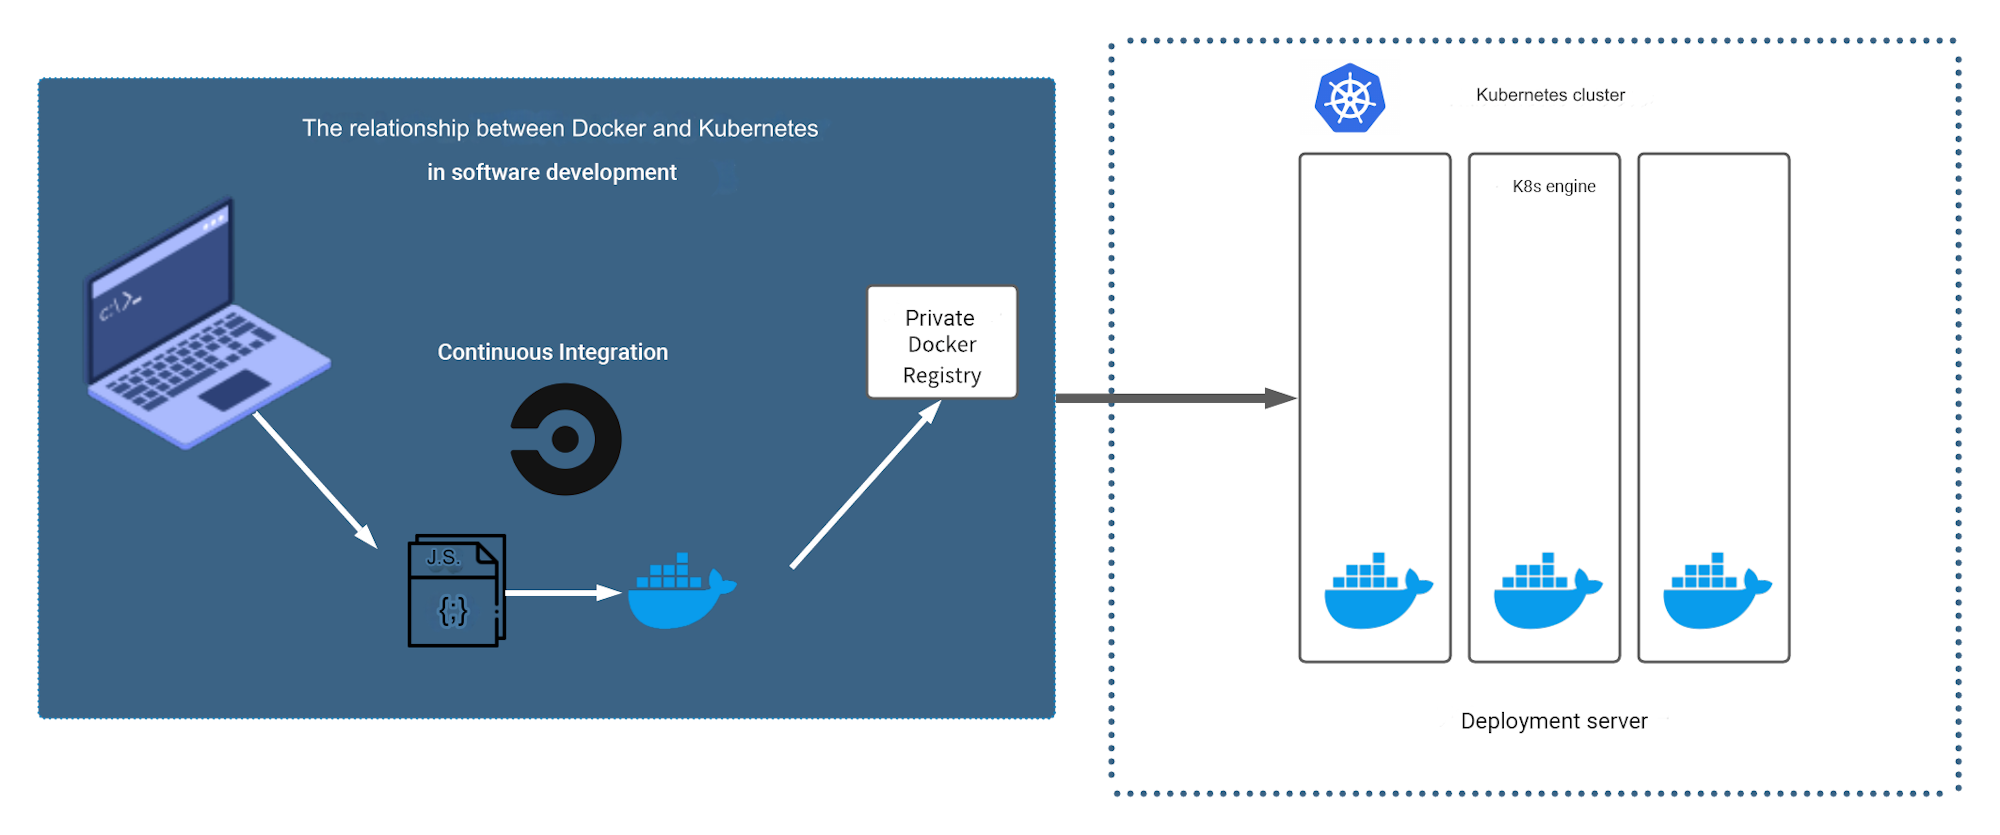 Illustration showing the differences between Kubernetes and Docker